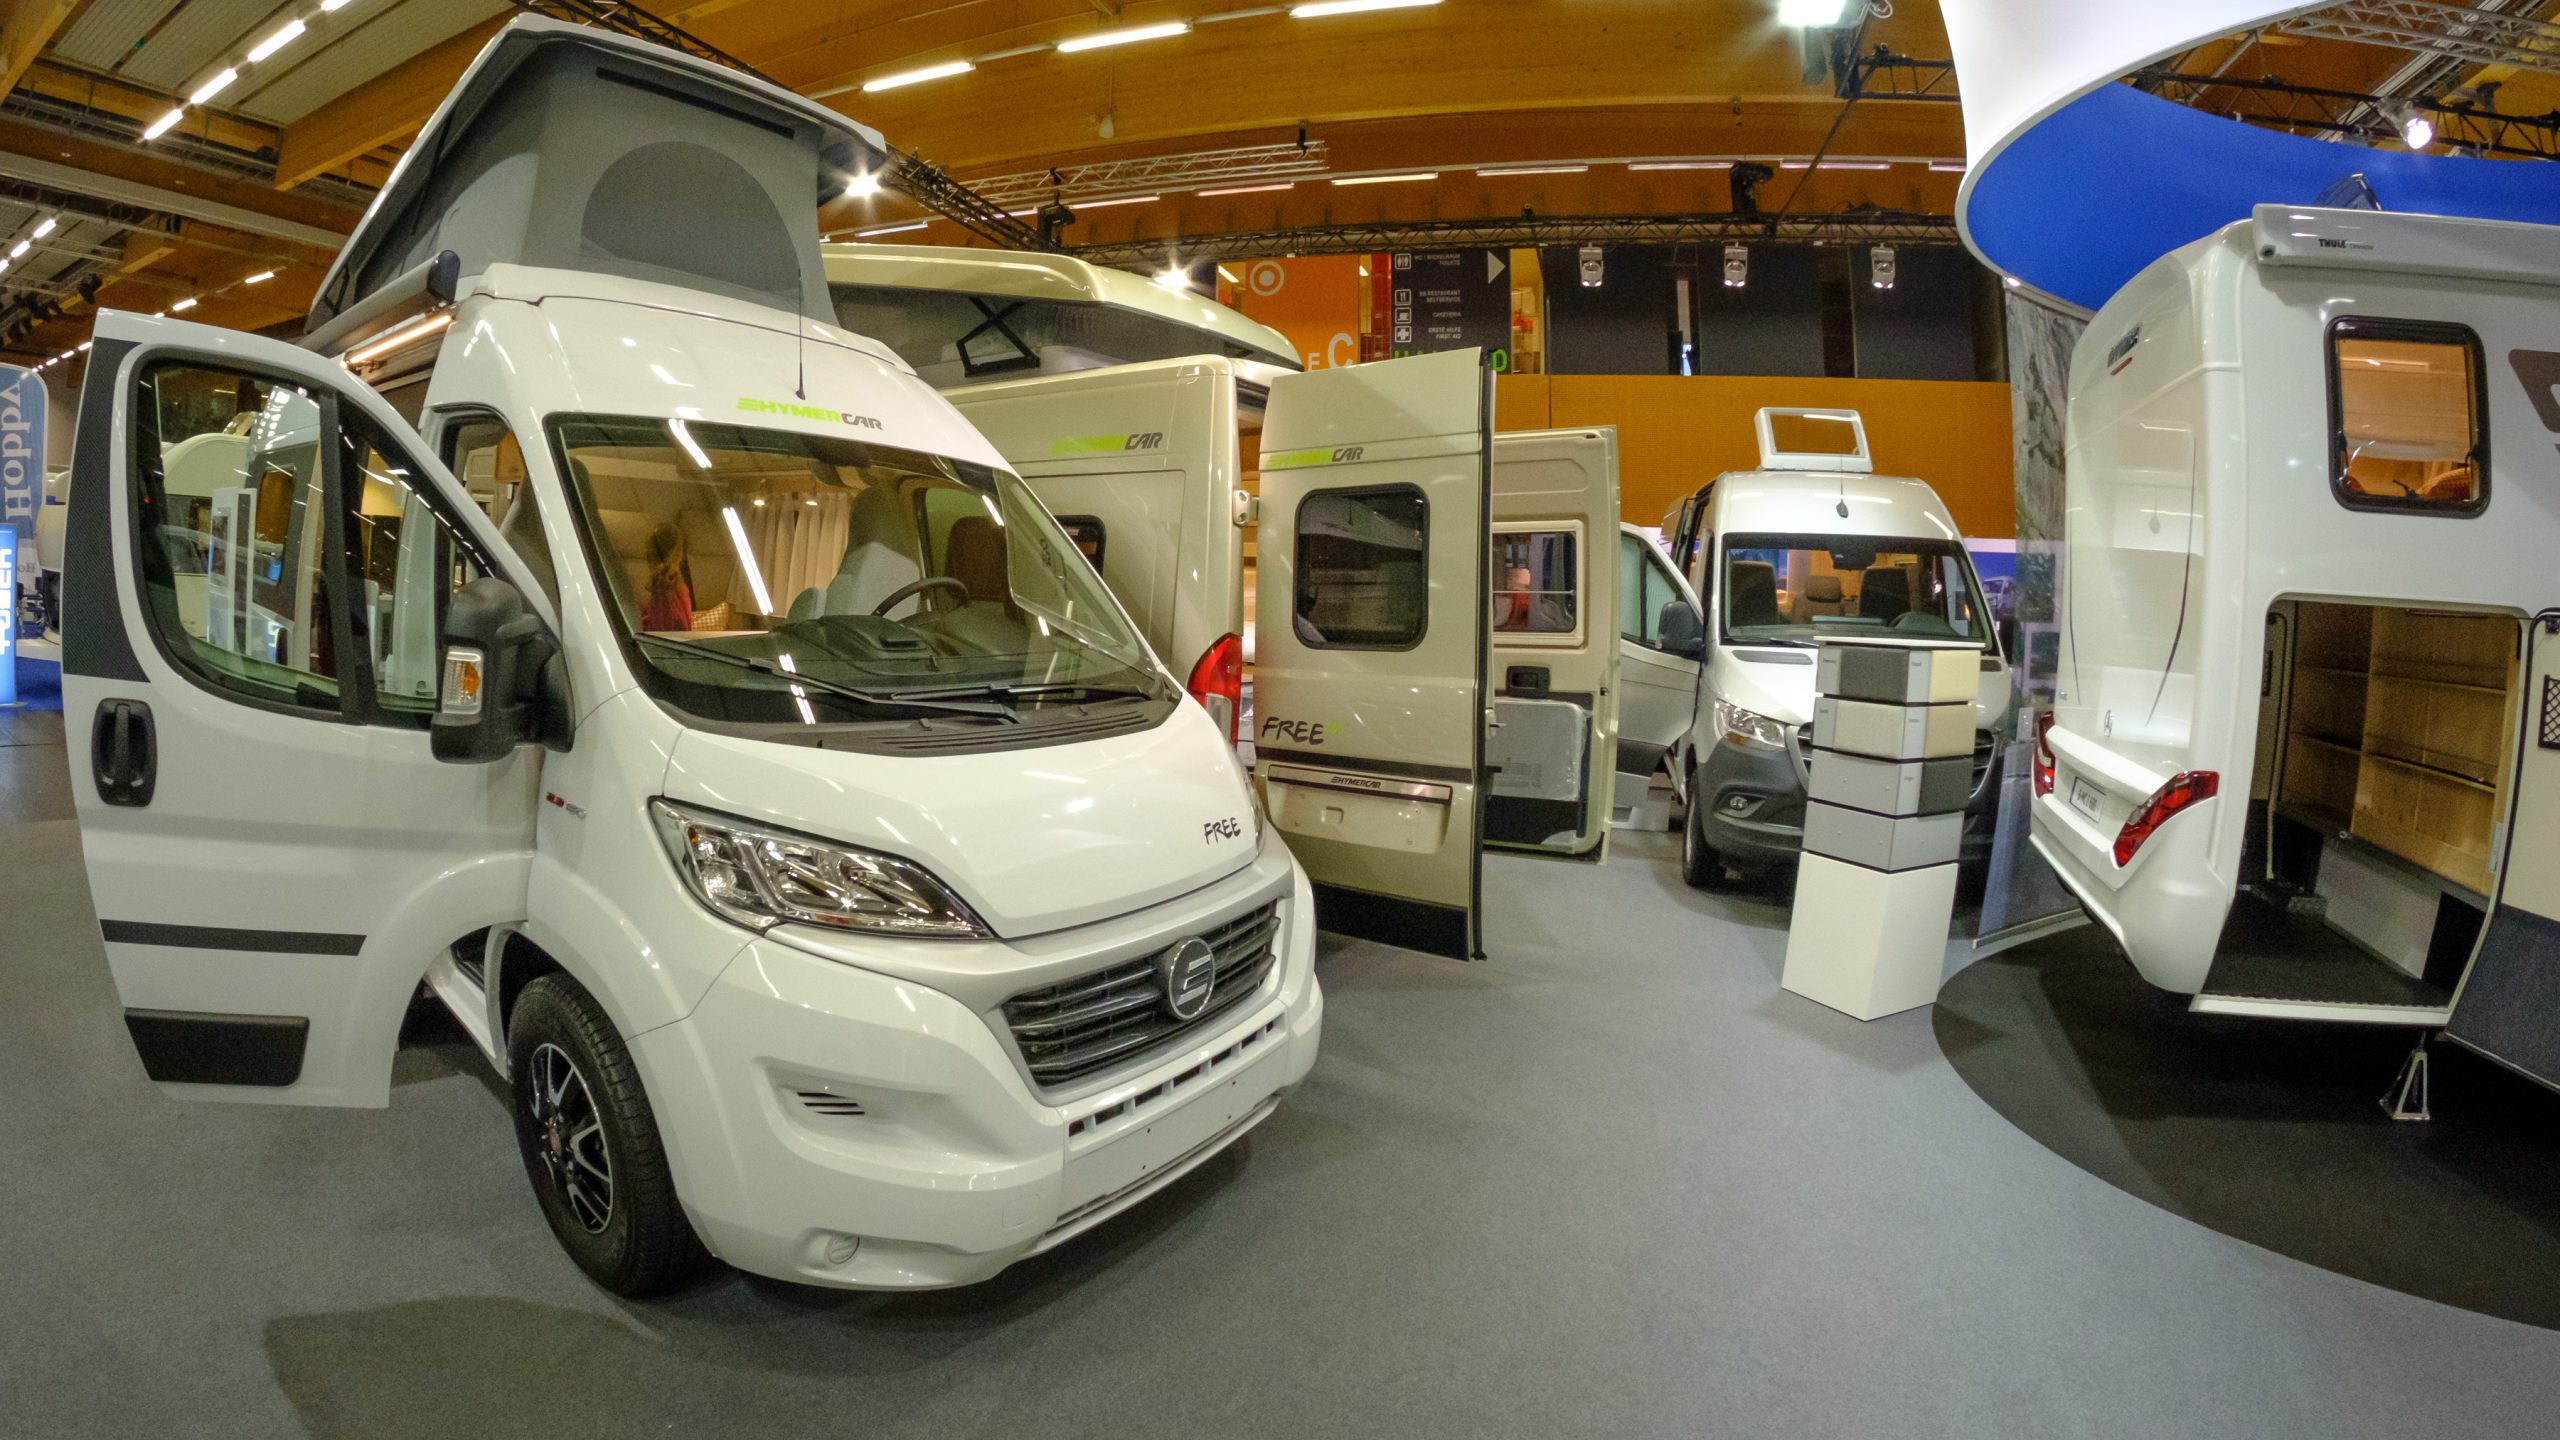 The Edmonton RV Expo and Sale: What to Expect in 2023